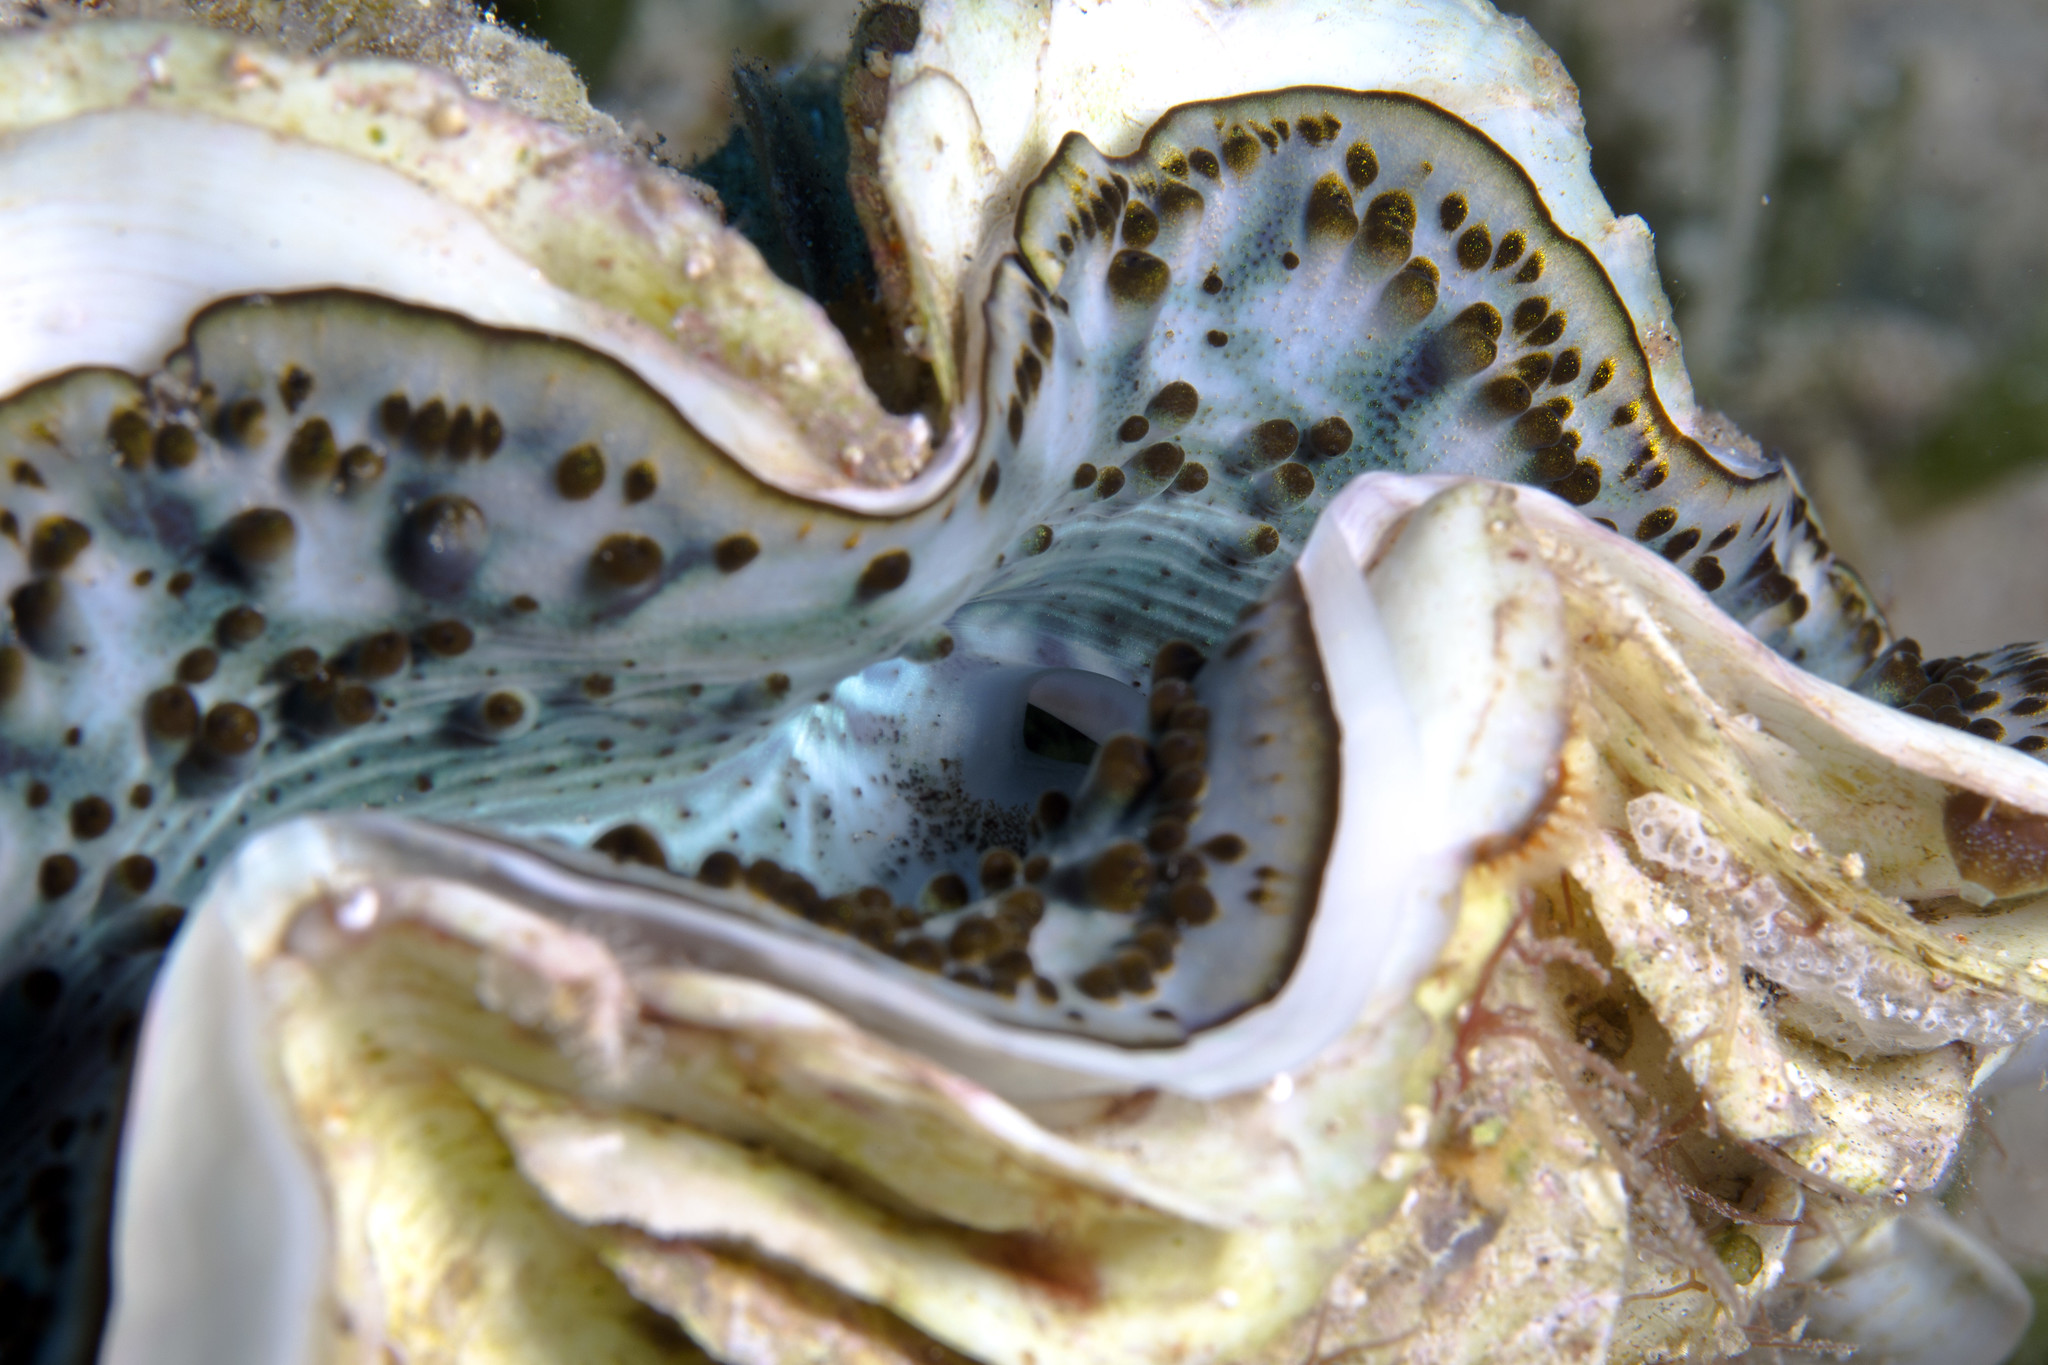 Giant Clam (by Silke Baron CC BY 2.0 via Flickr)